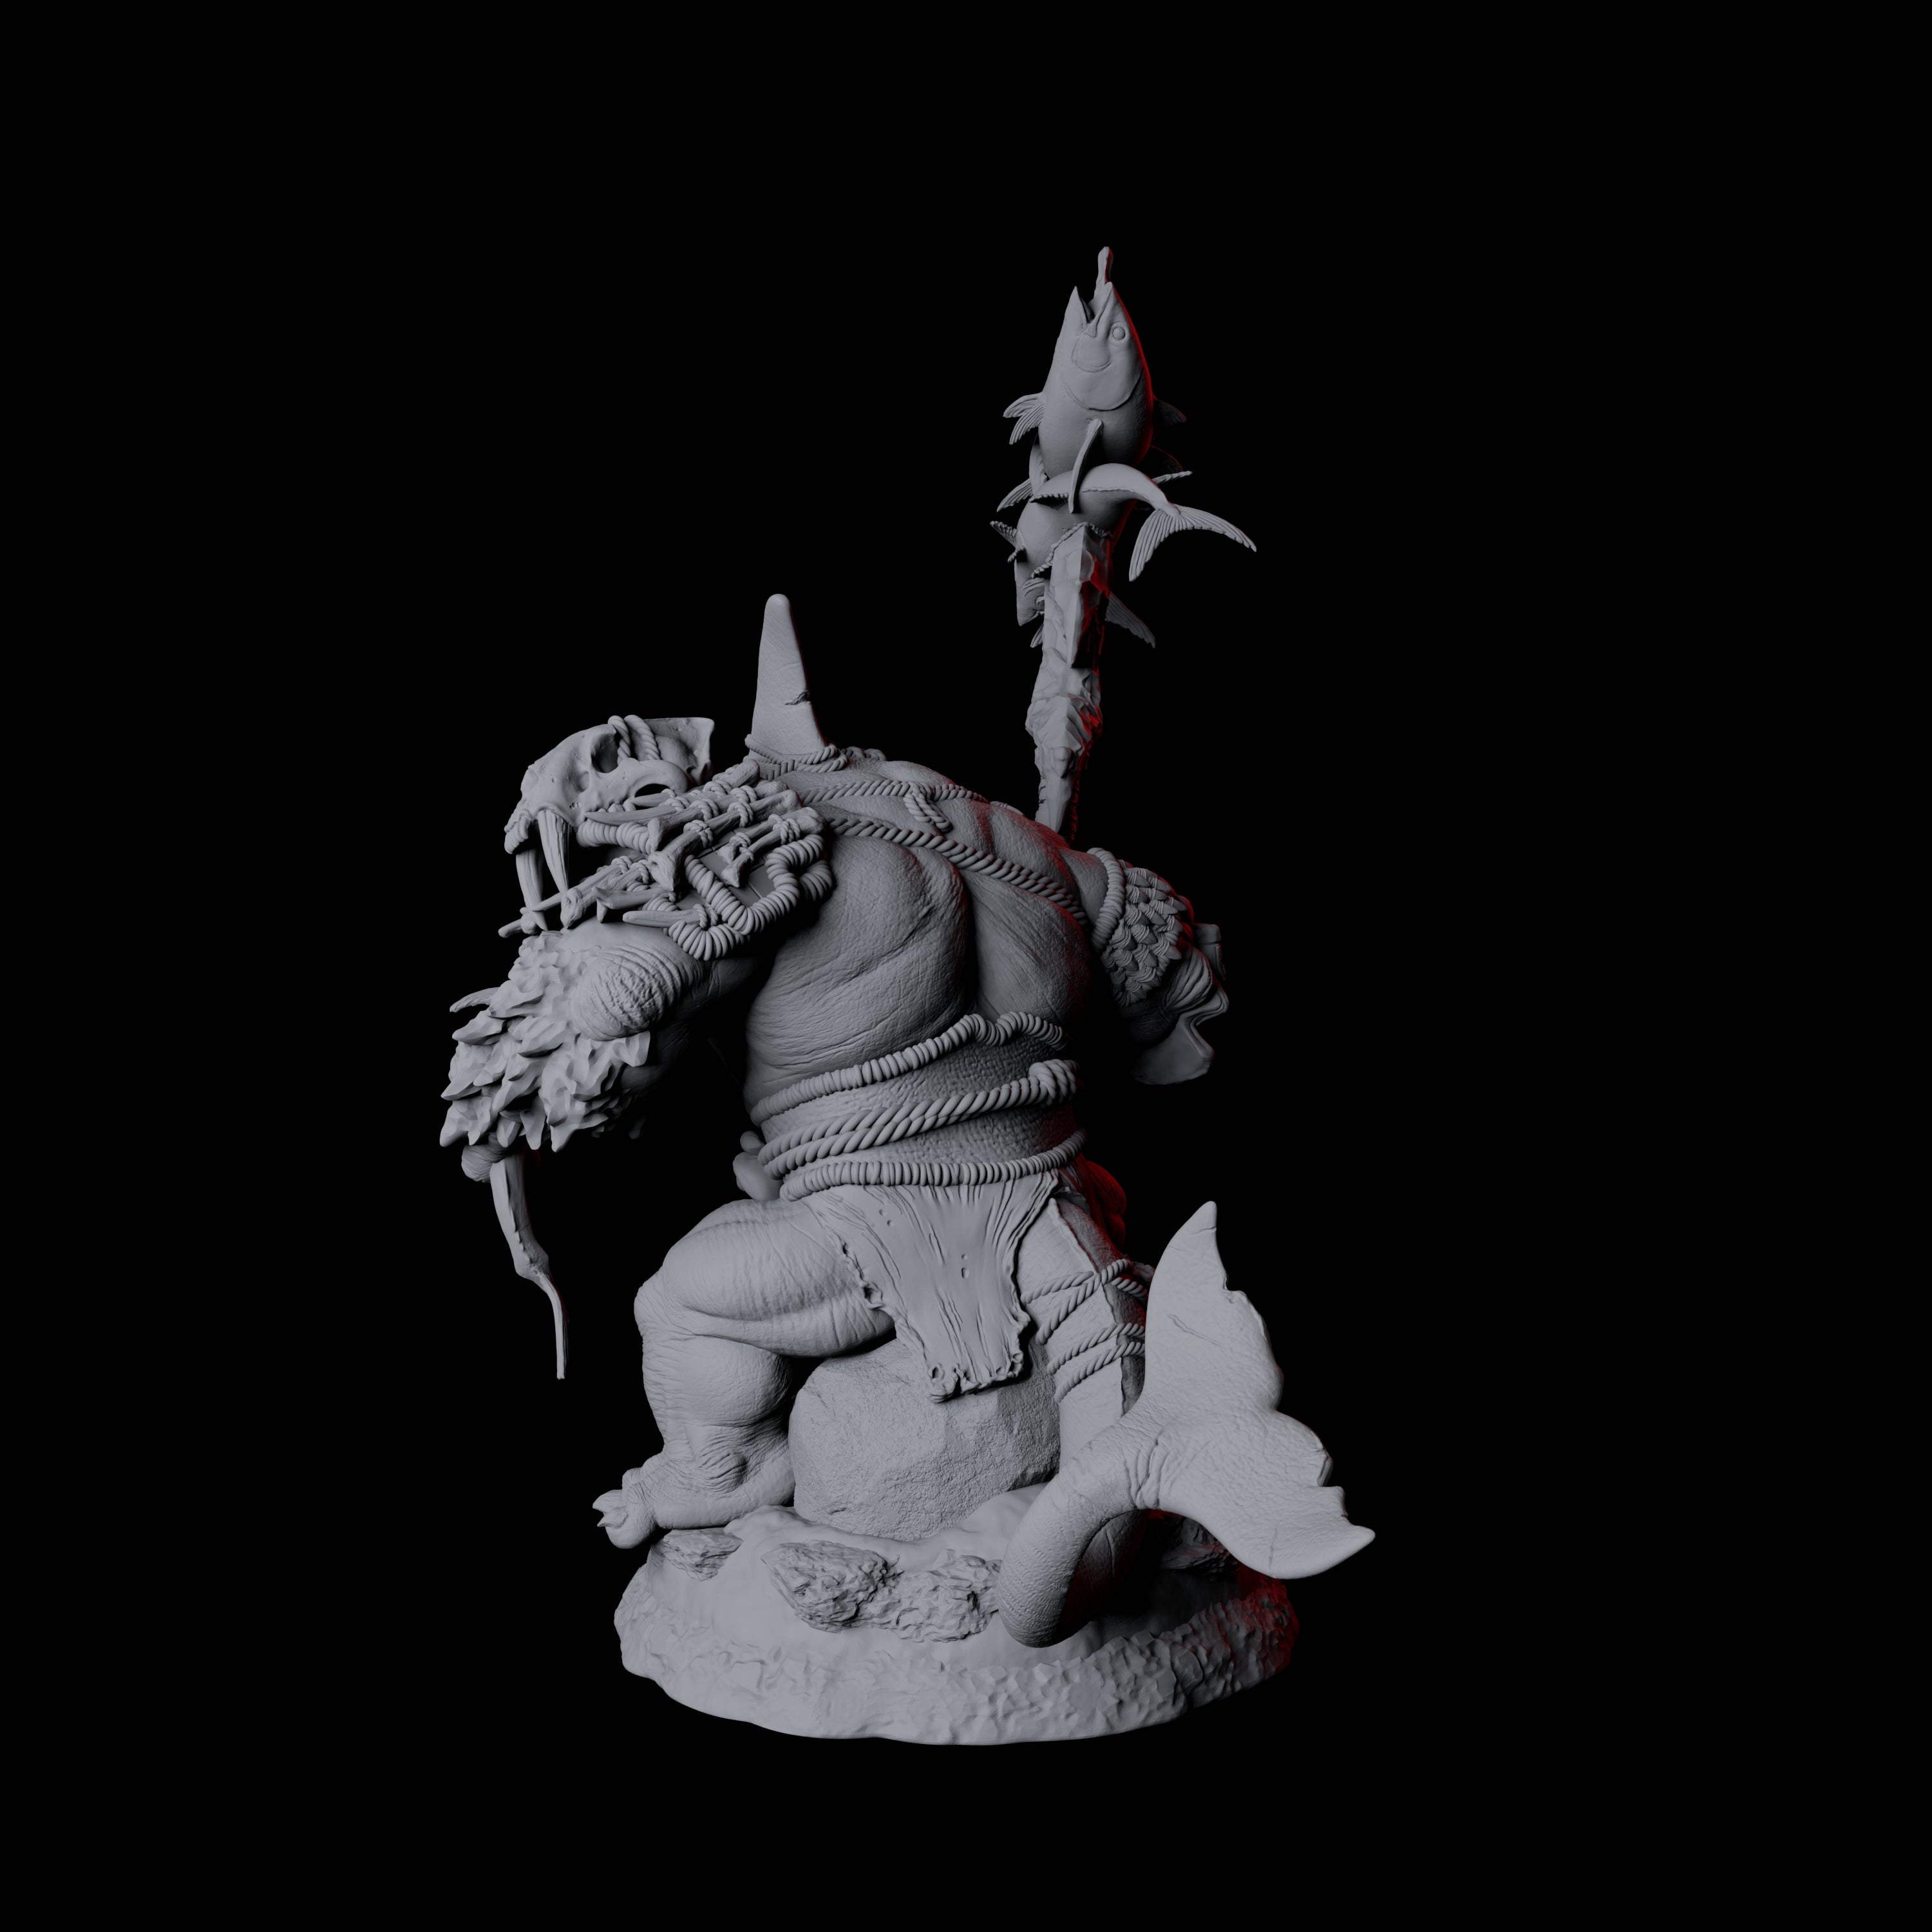 Graceful Orcafolk Warrior C Miniature for Dungeons and Dragons, Pathfinder or other TTRPGs